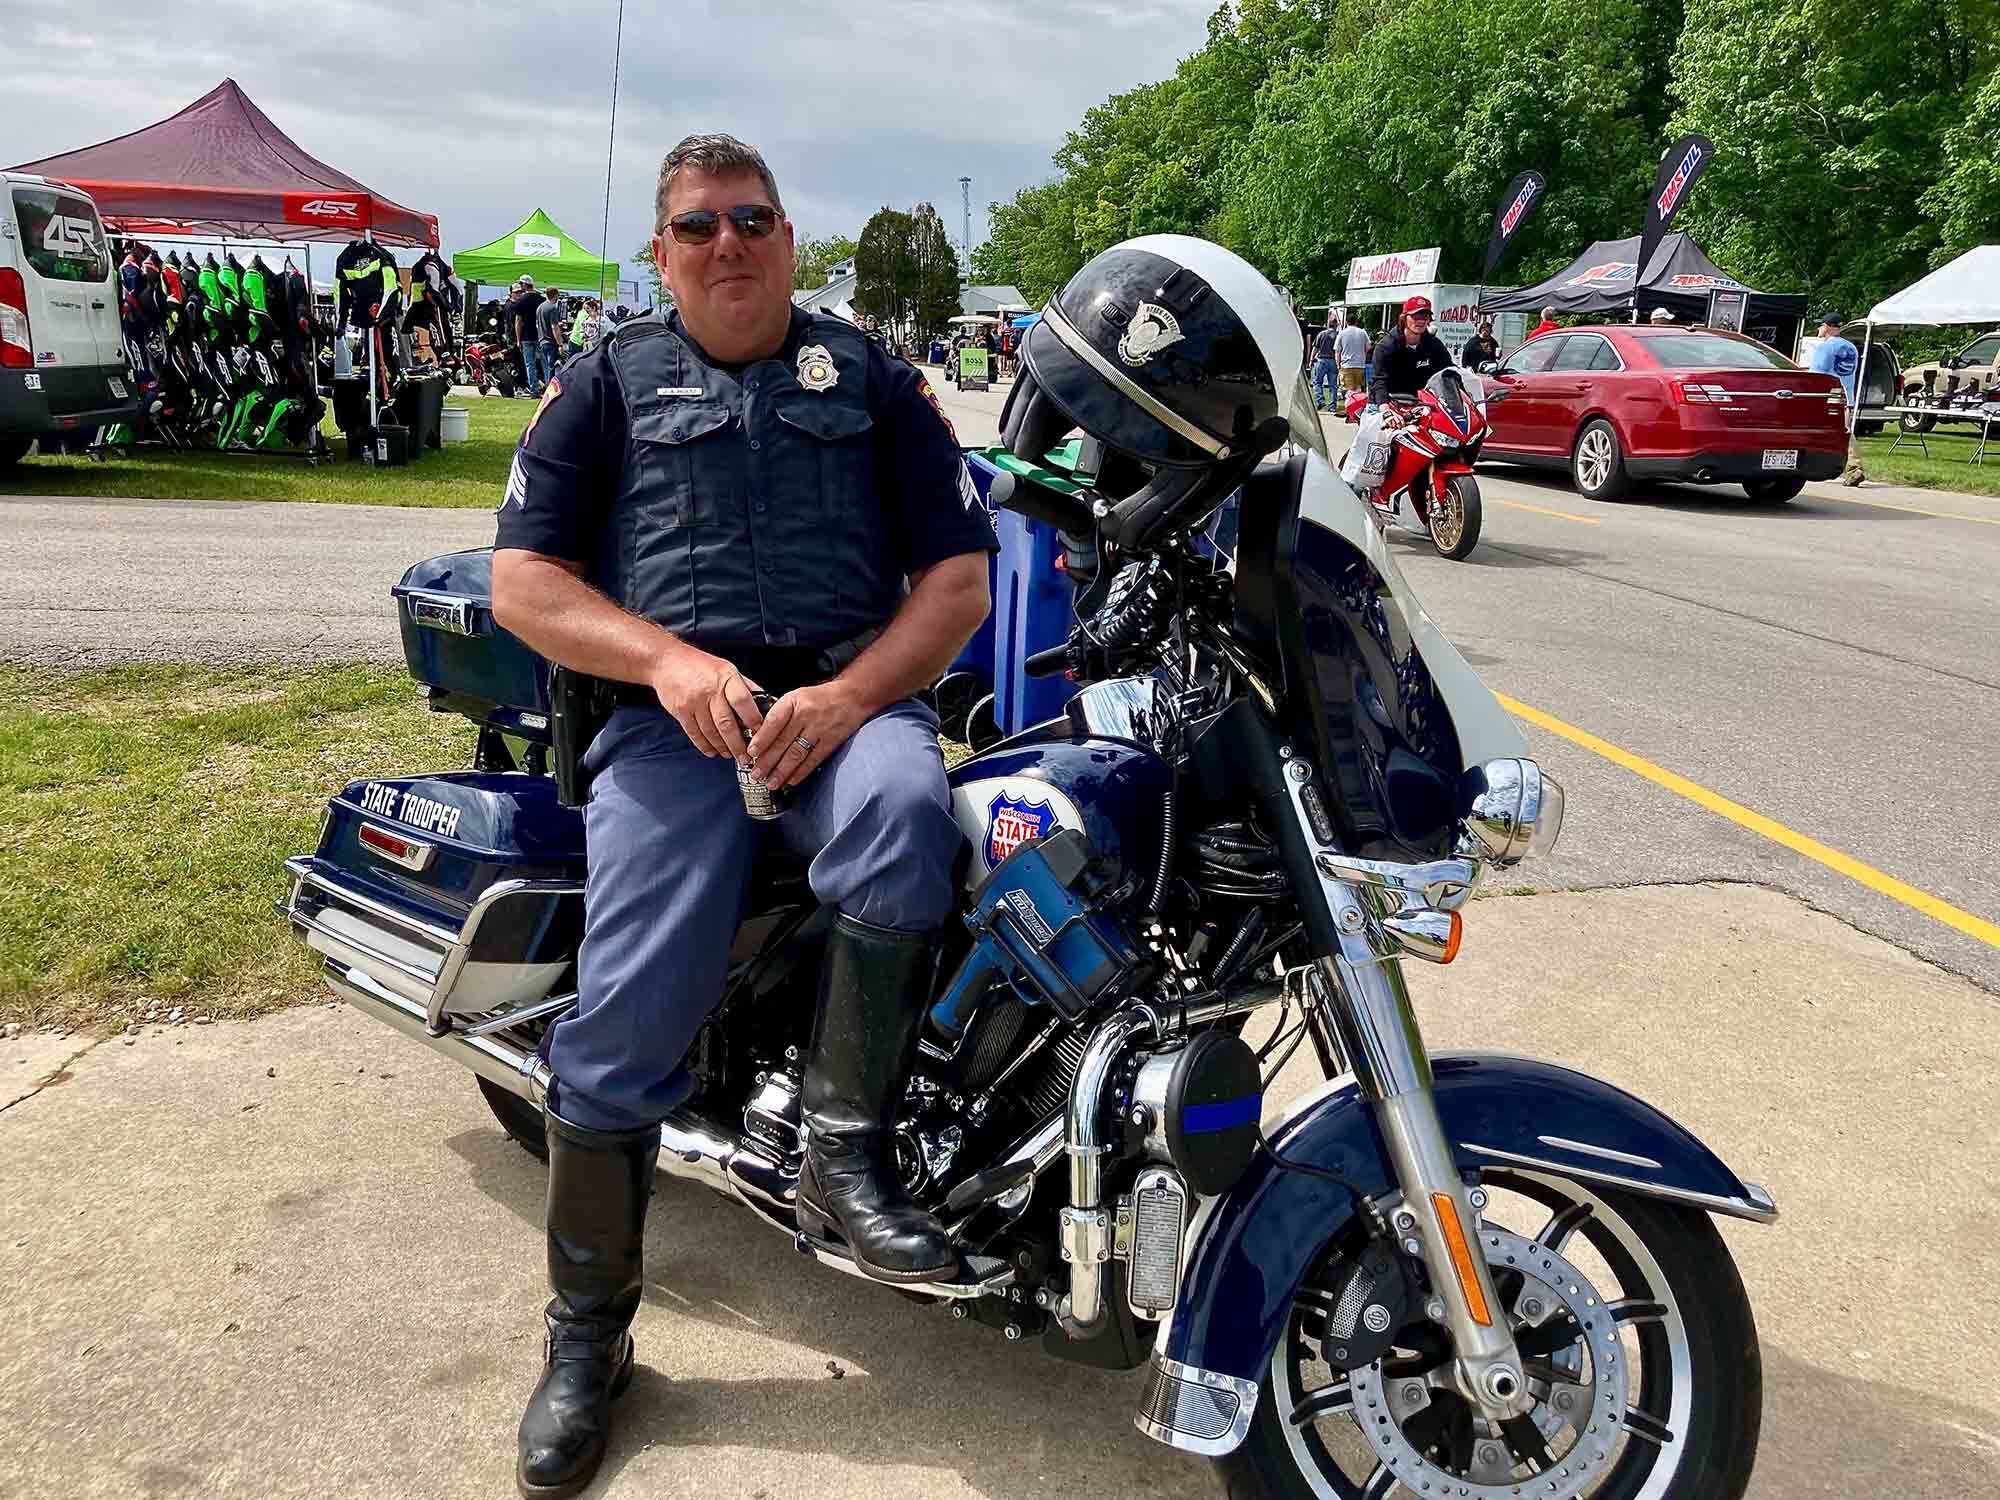 Ensuring orderly fun: Wisconsin State Patrol Motor Officer Holtz, pulling a plum assignment.